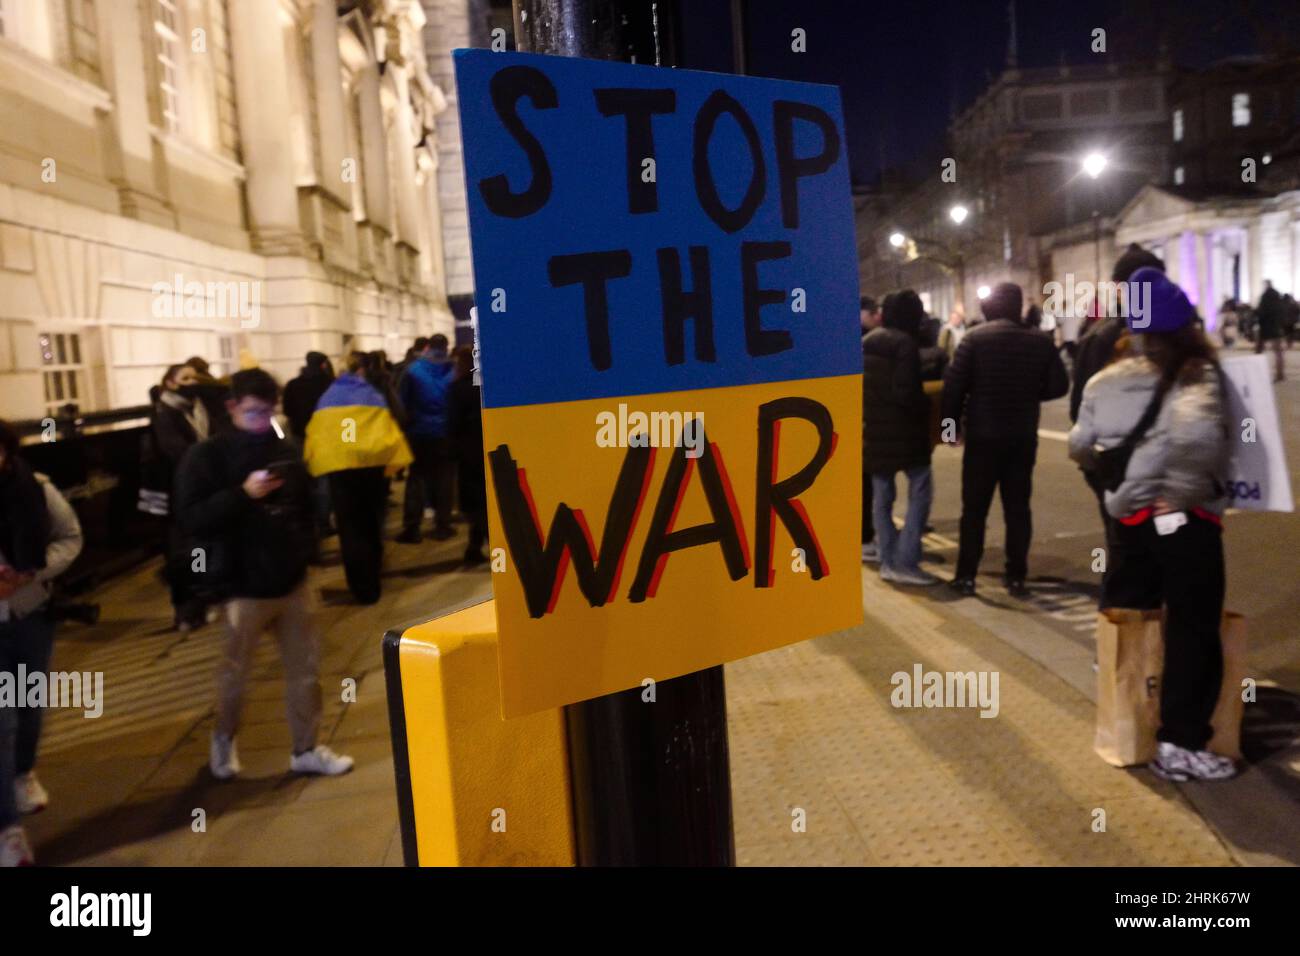 'Stop the war' sign on a traffic light, Protest against Russia's invasion of Ukraine, Whitehall, near Downing Street, London, UK, 25 February 2022 Stock Photo